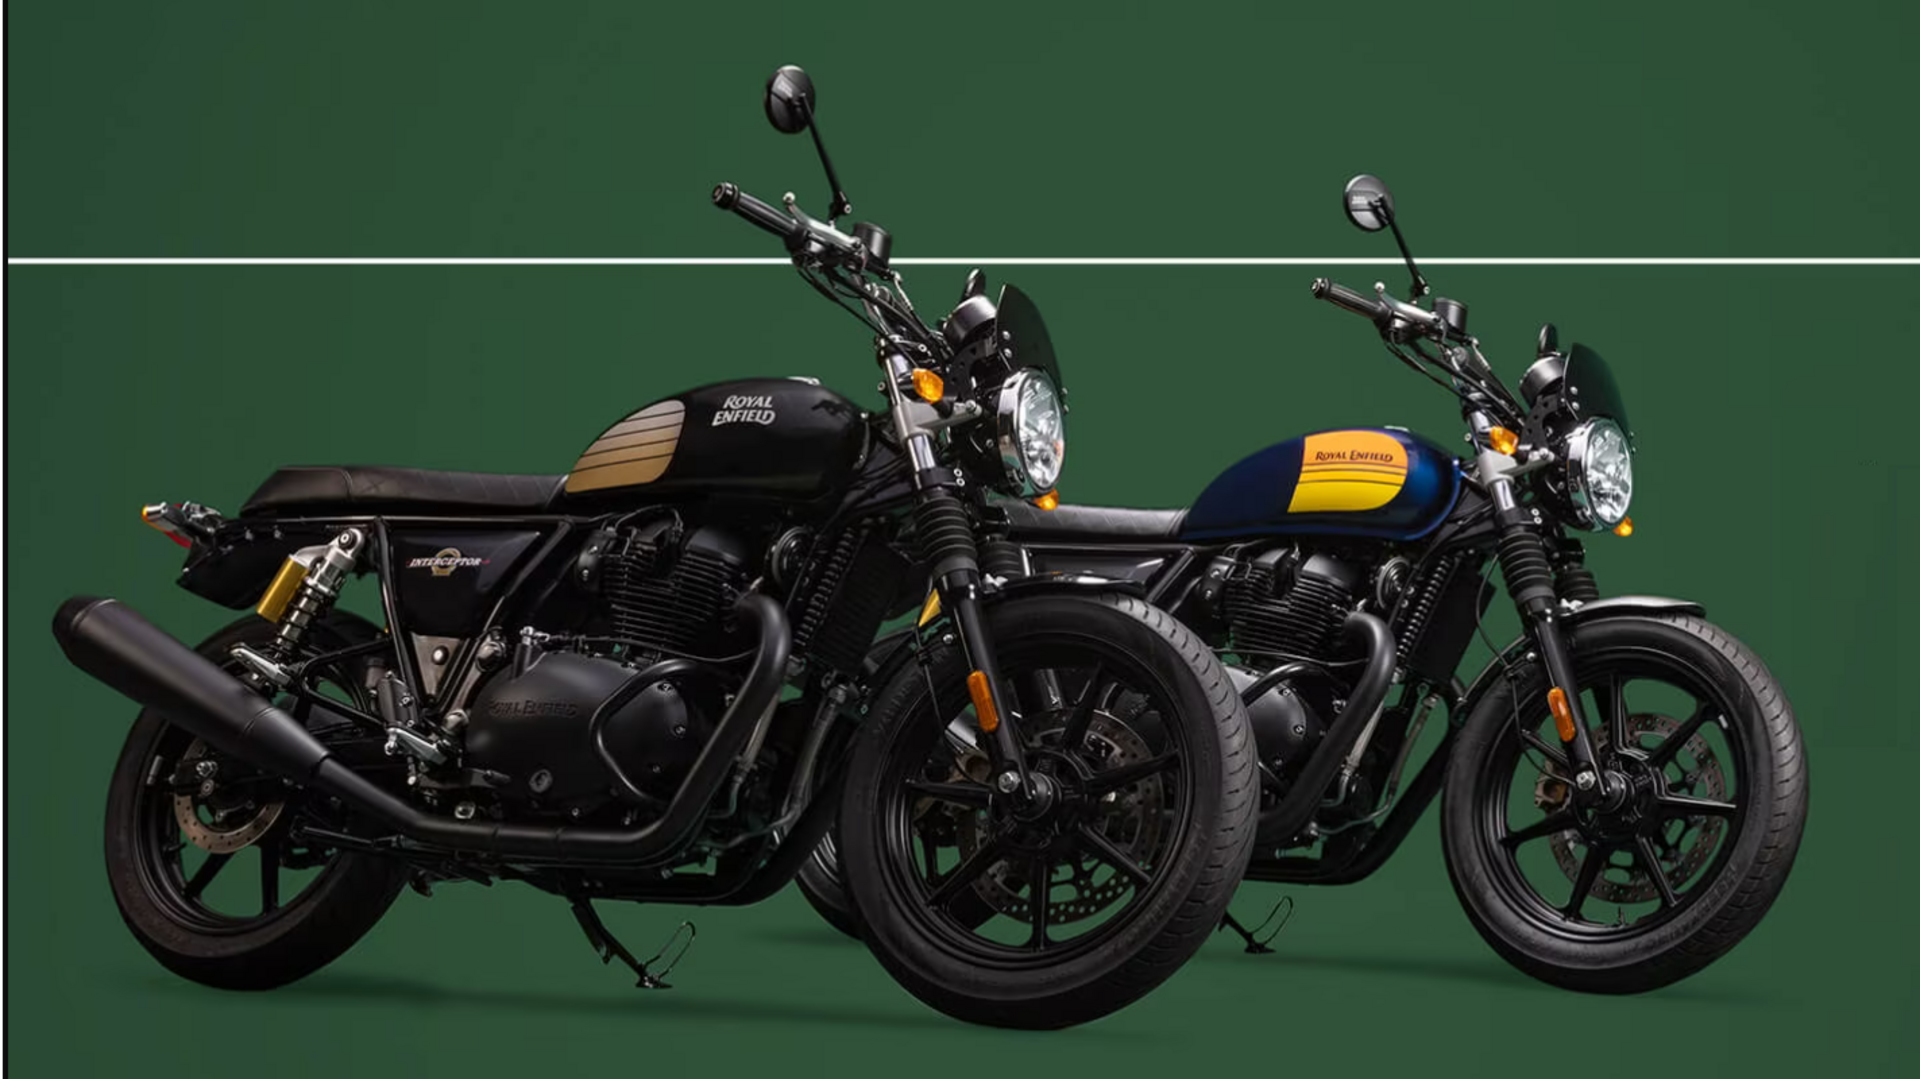 Top alternatives to Royal Enfield Interceptor 650 in India